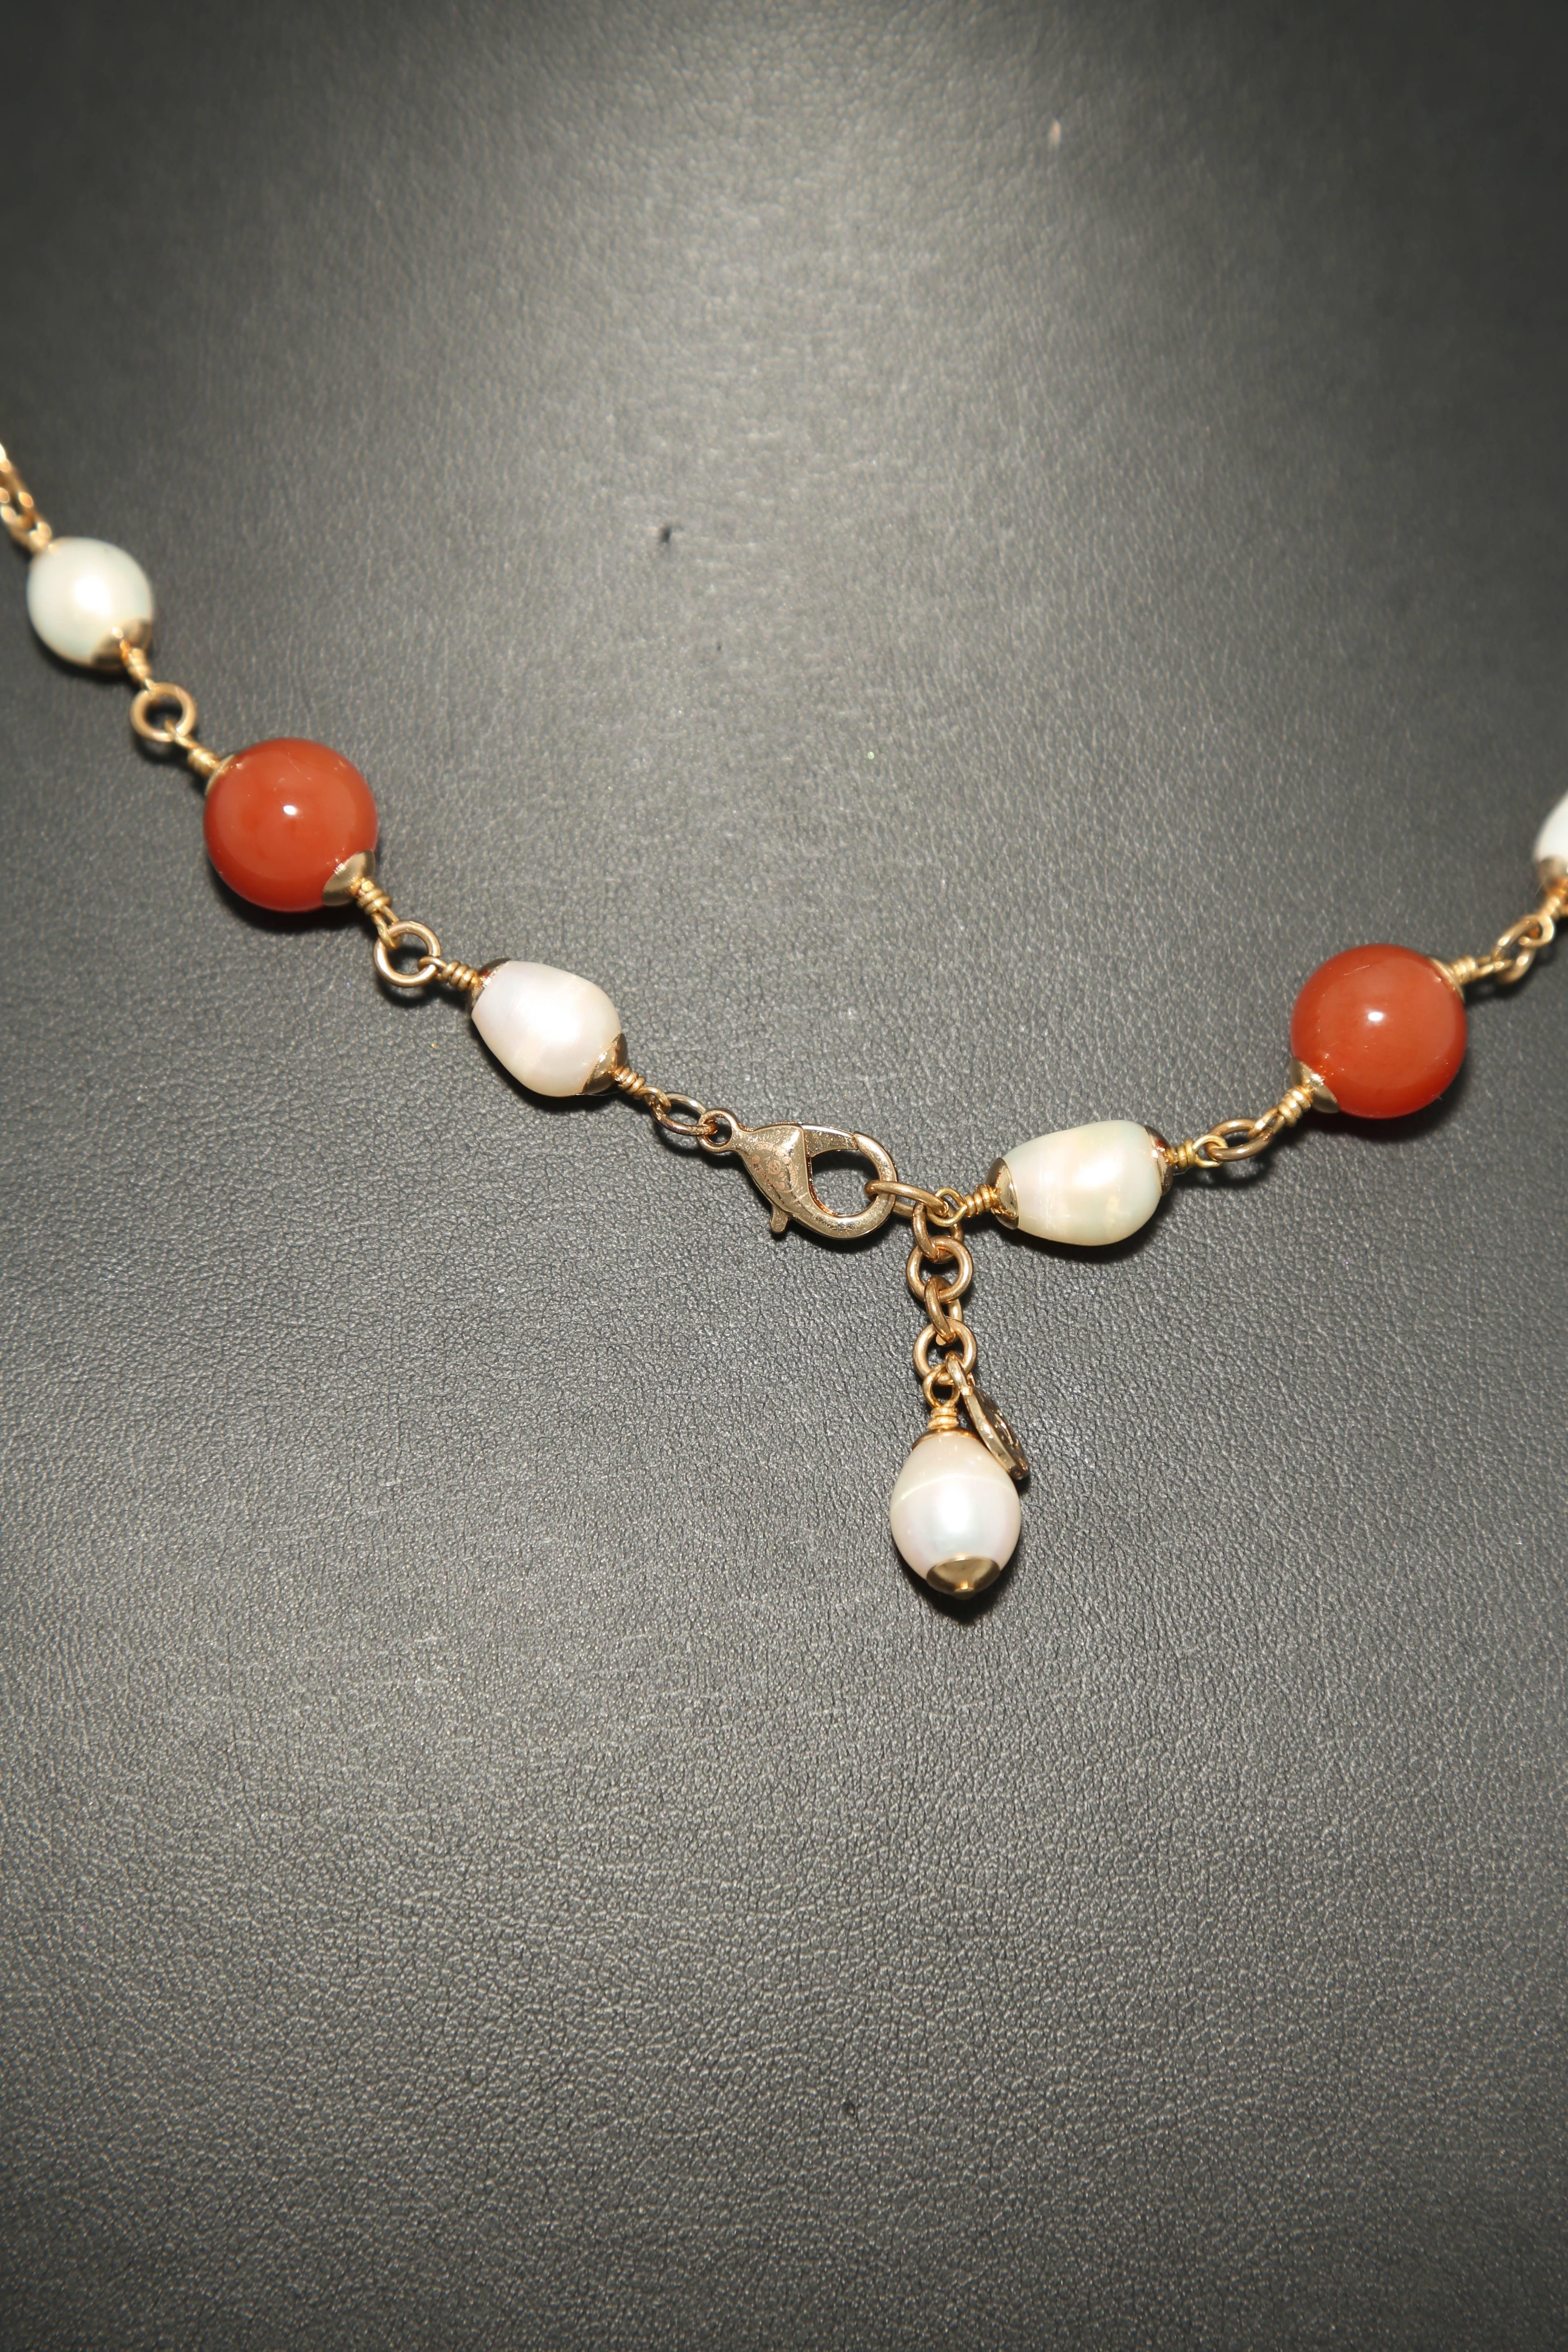 Women's chanel Necklace with agate and pearls